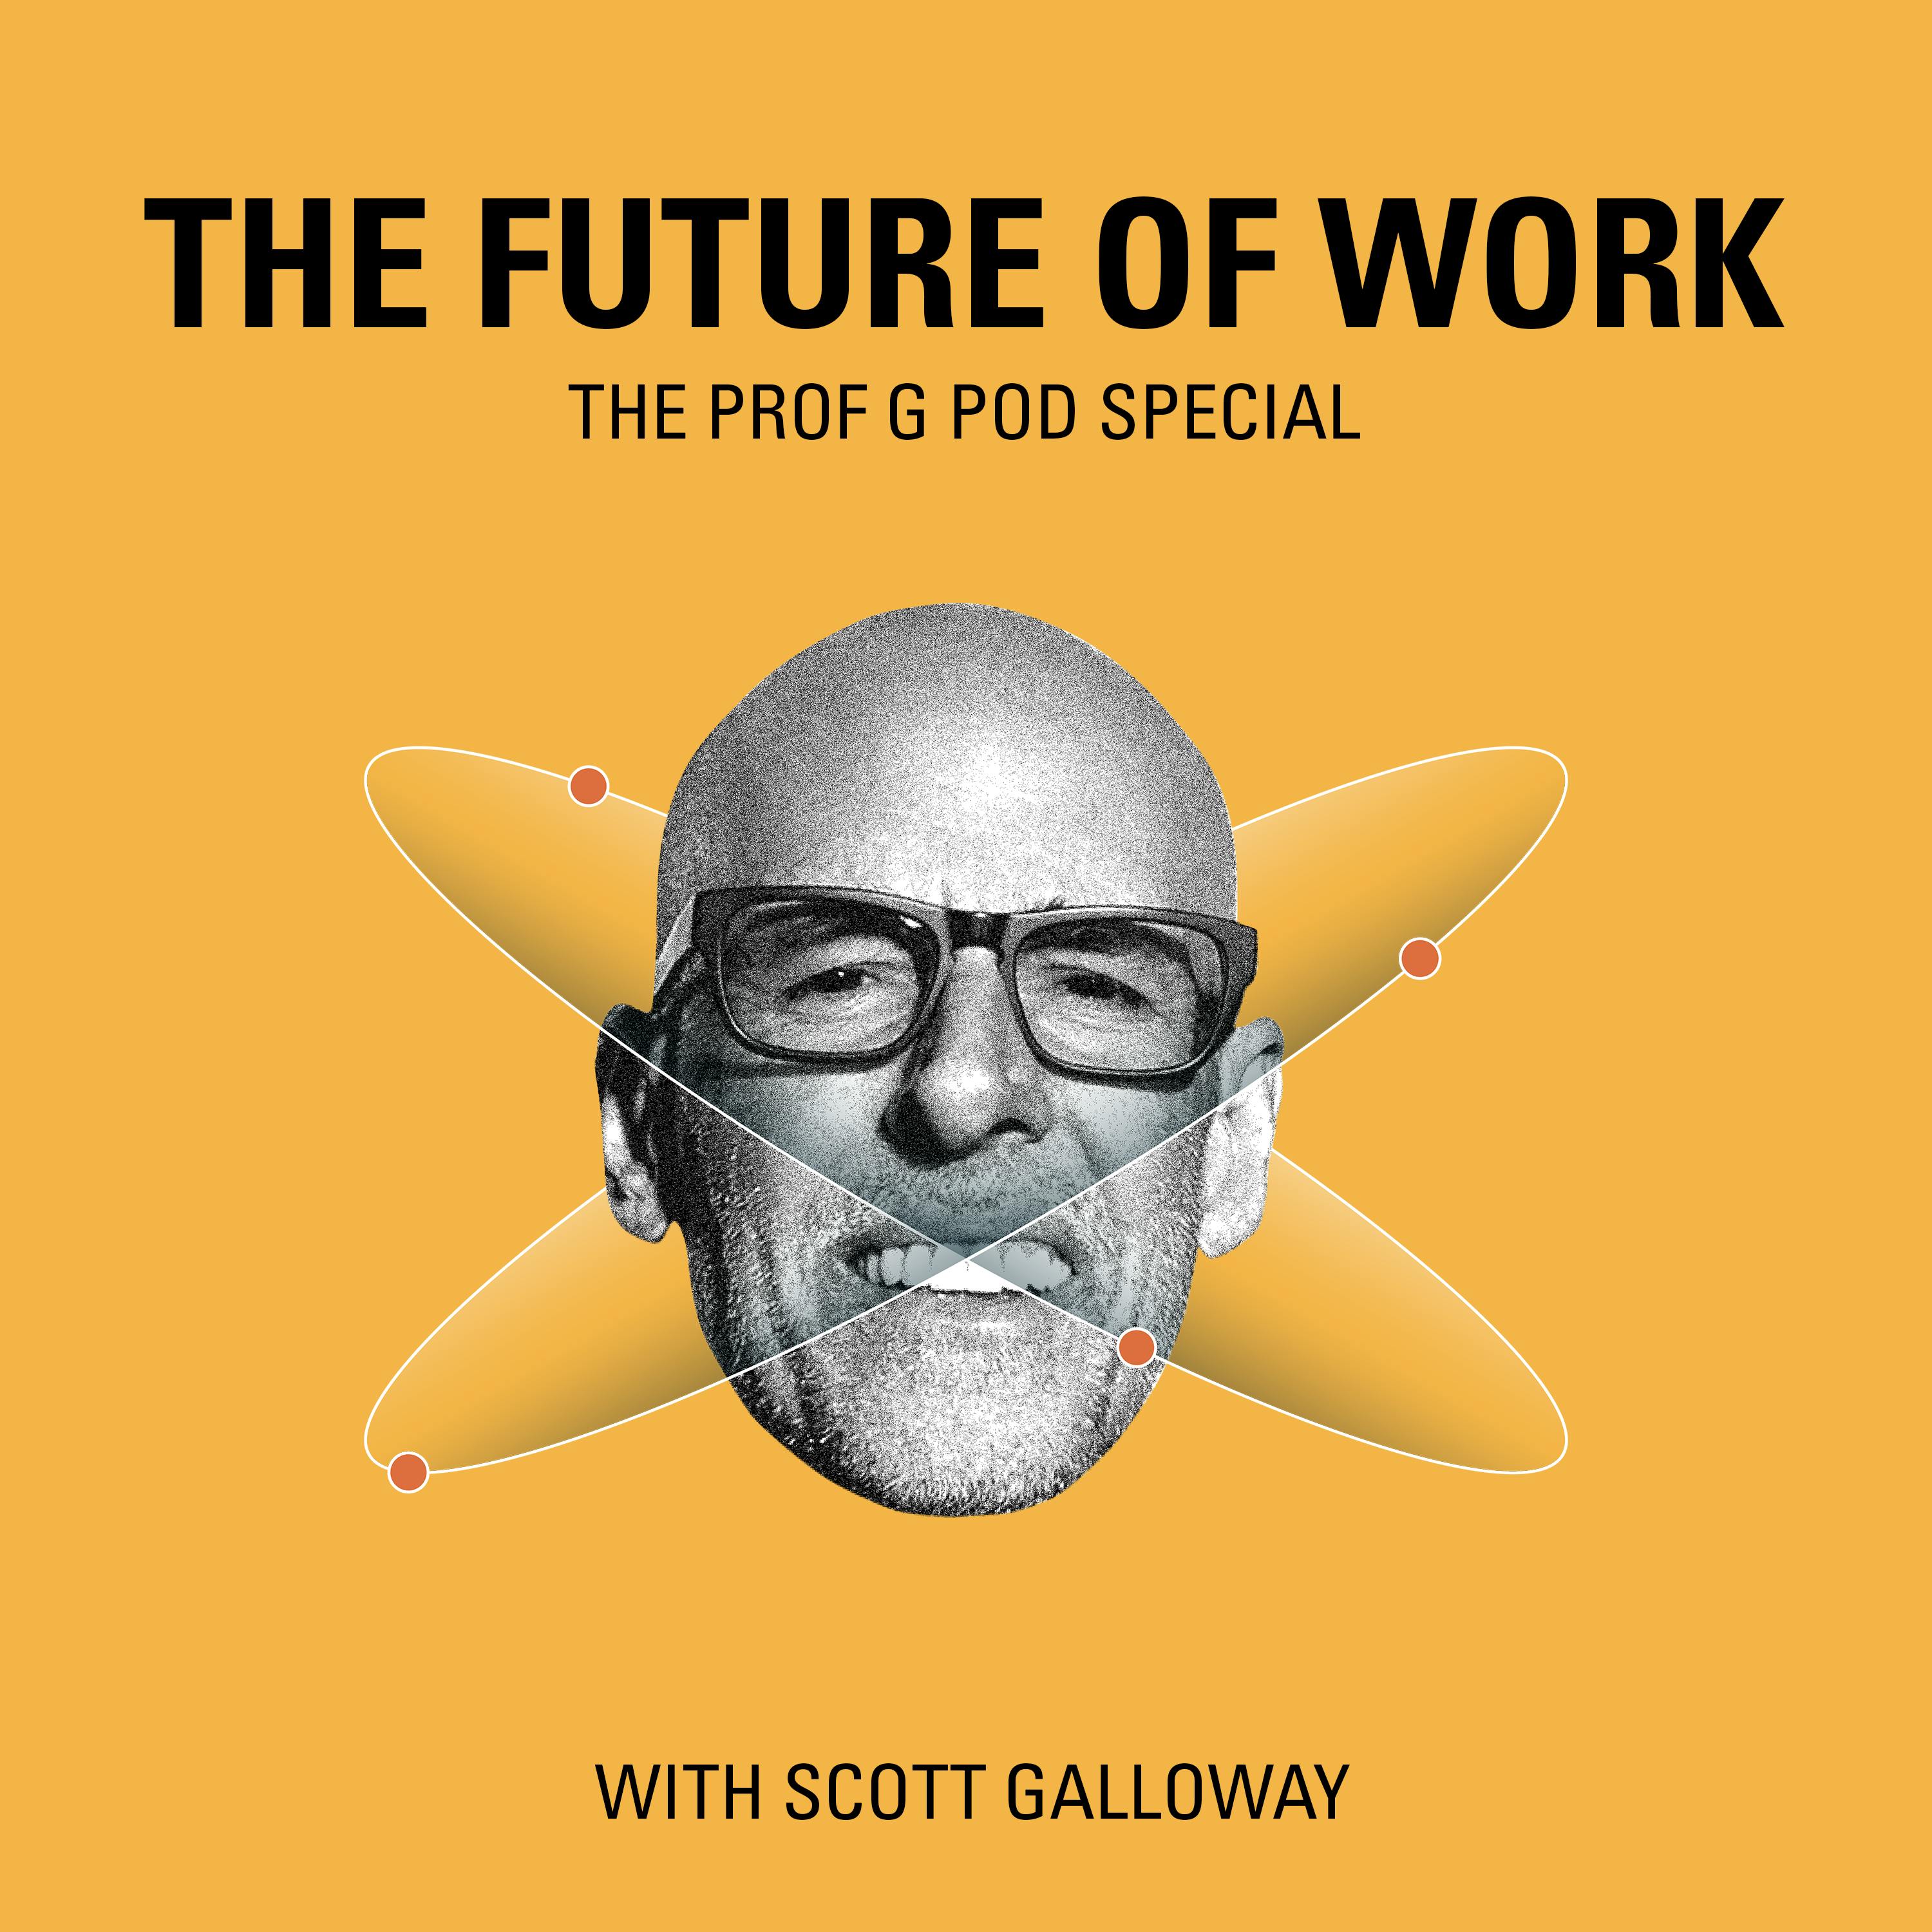 The Future of Work Part 1: Get to HQ